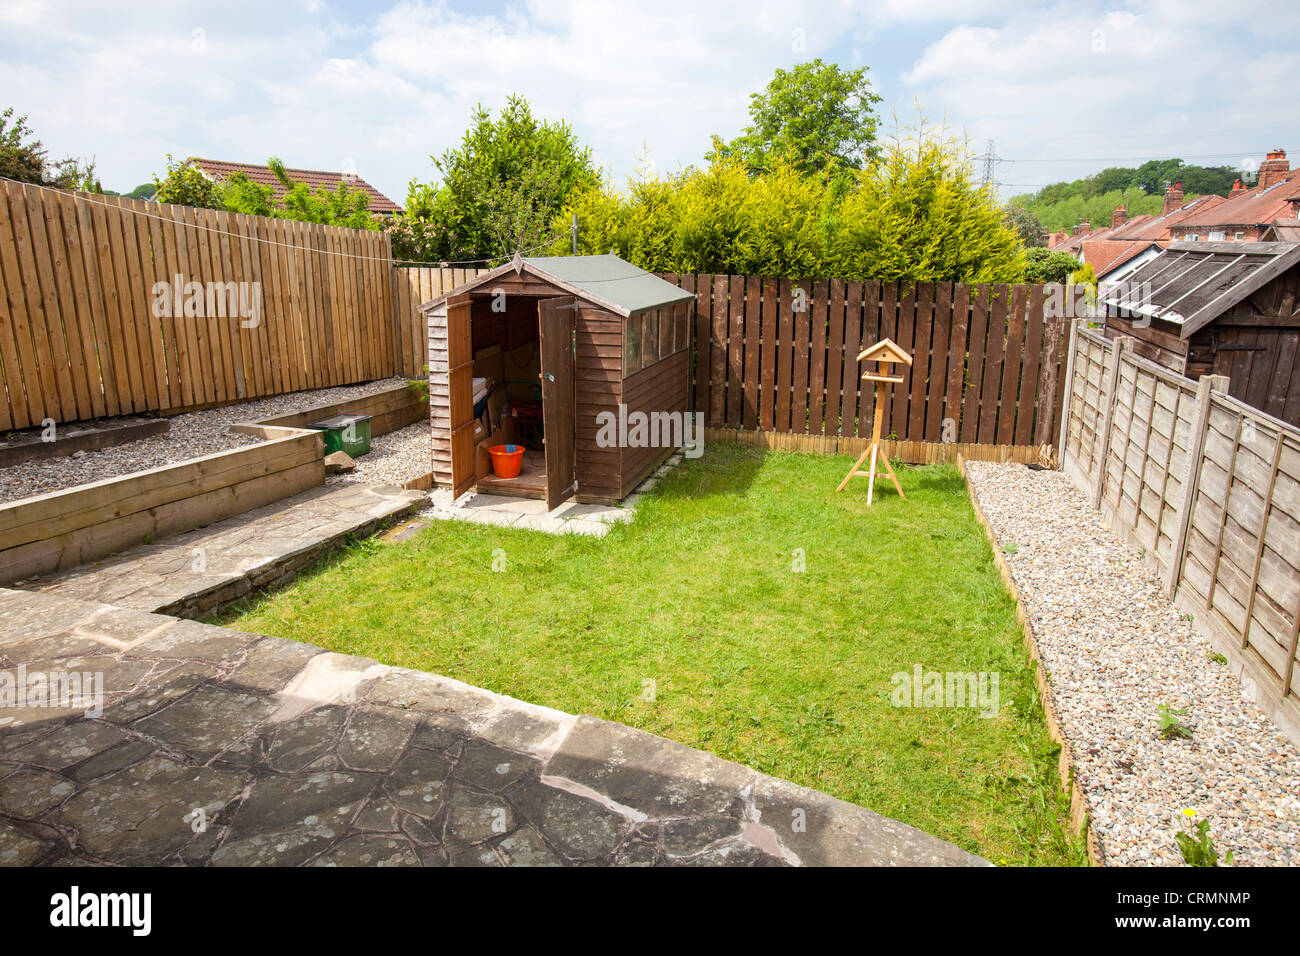 A small back garden of a post war 1940's semi detached house in Macclesfield, Cheshire, UK. Stock Photo